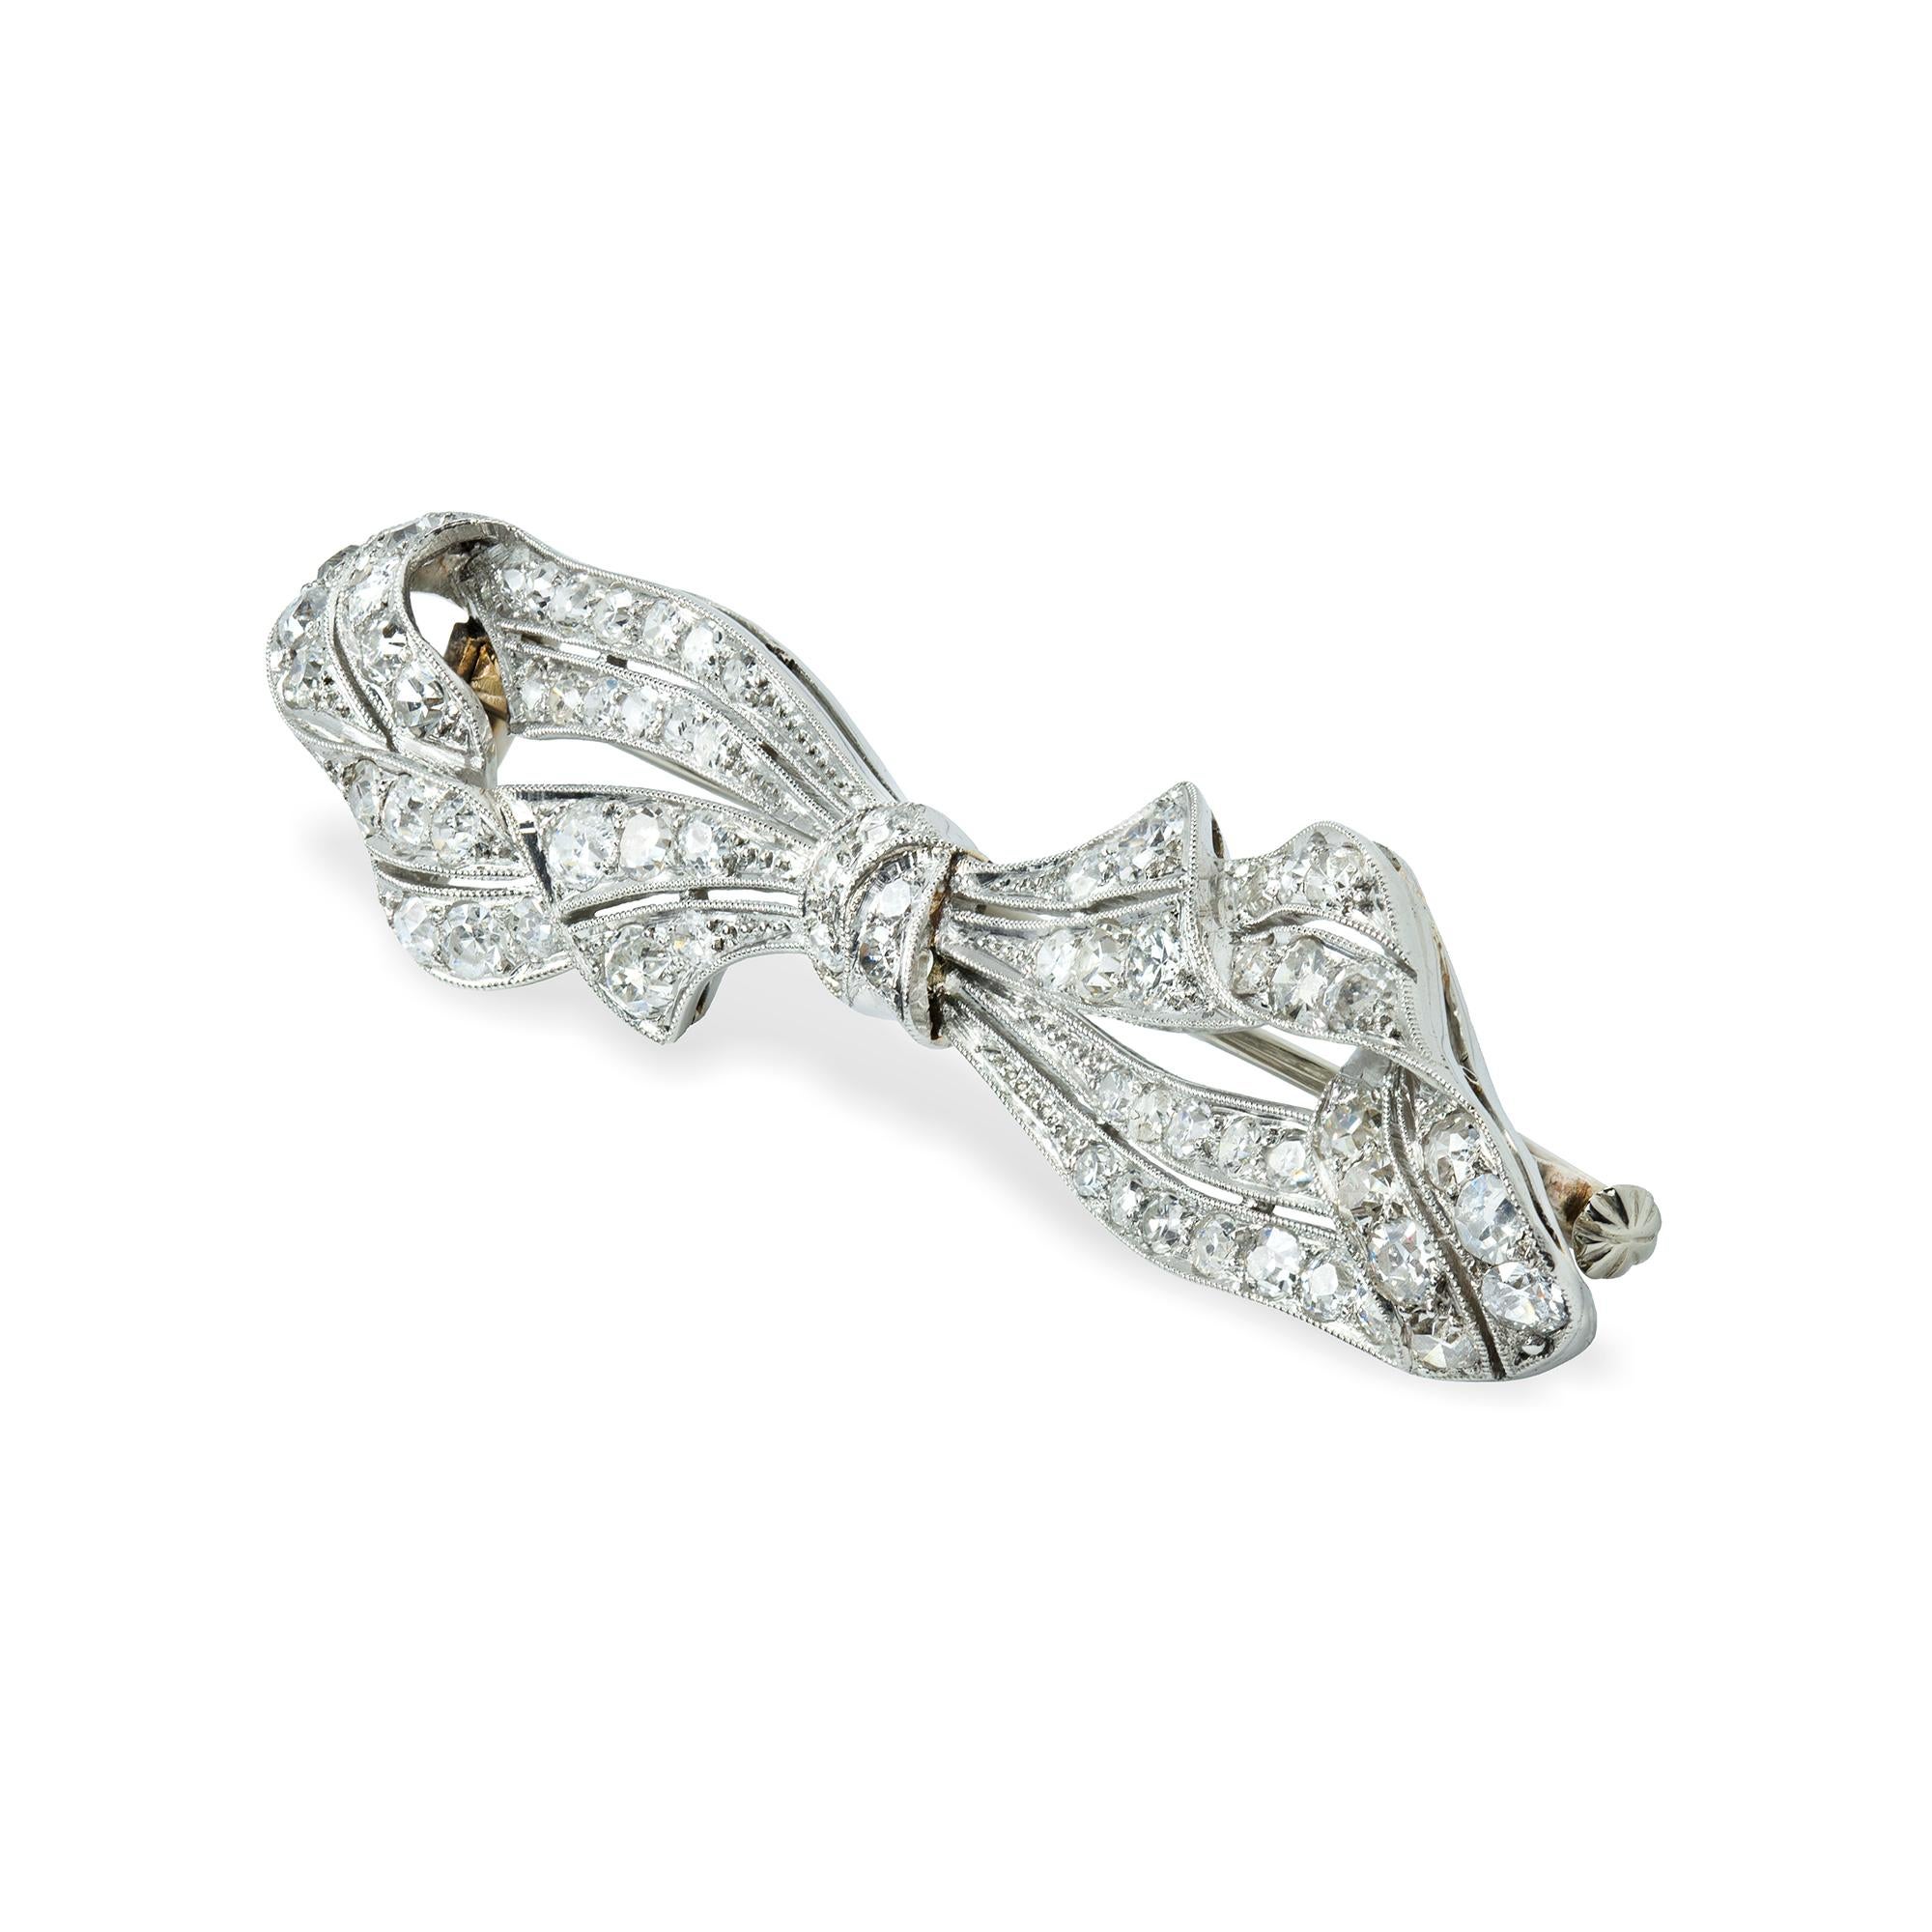 An Vintage diamond-set bow brooch, the old brilliant-cut diamonds old brilliant-cut diamonds estimated to weigh 3 carats in total, millegrain-set in platinum openwork mount in the form of a bow, with yellow gold pin fitting, bearing Austrian